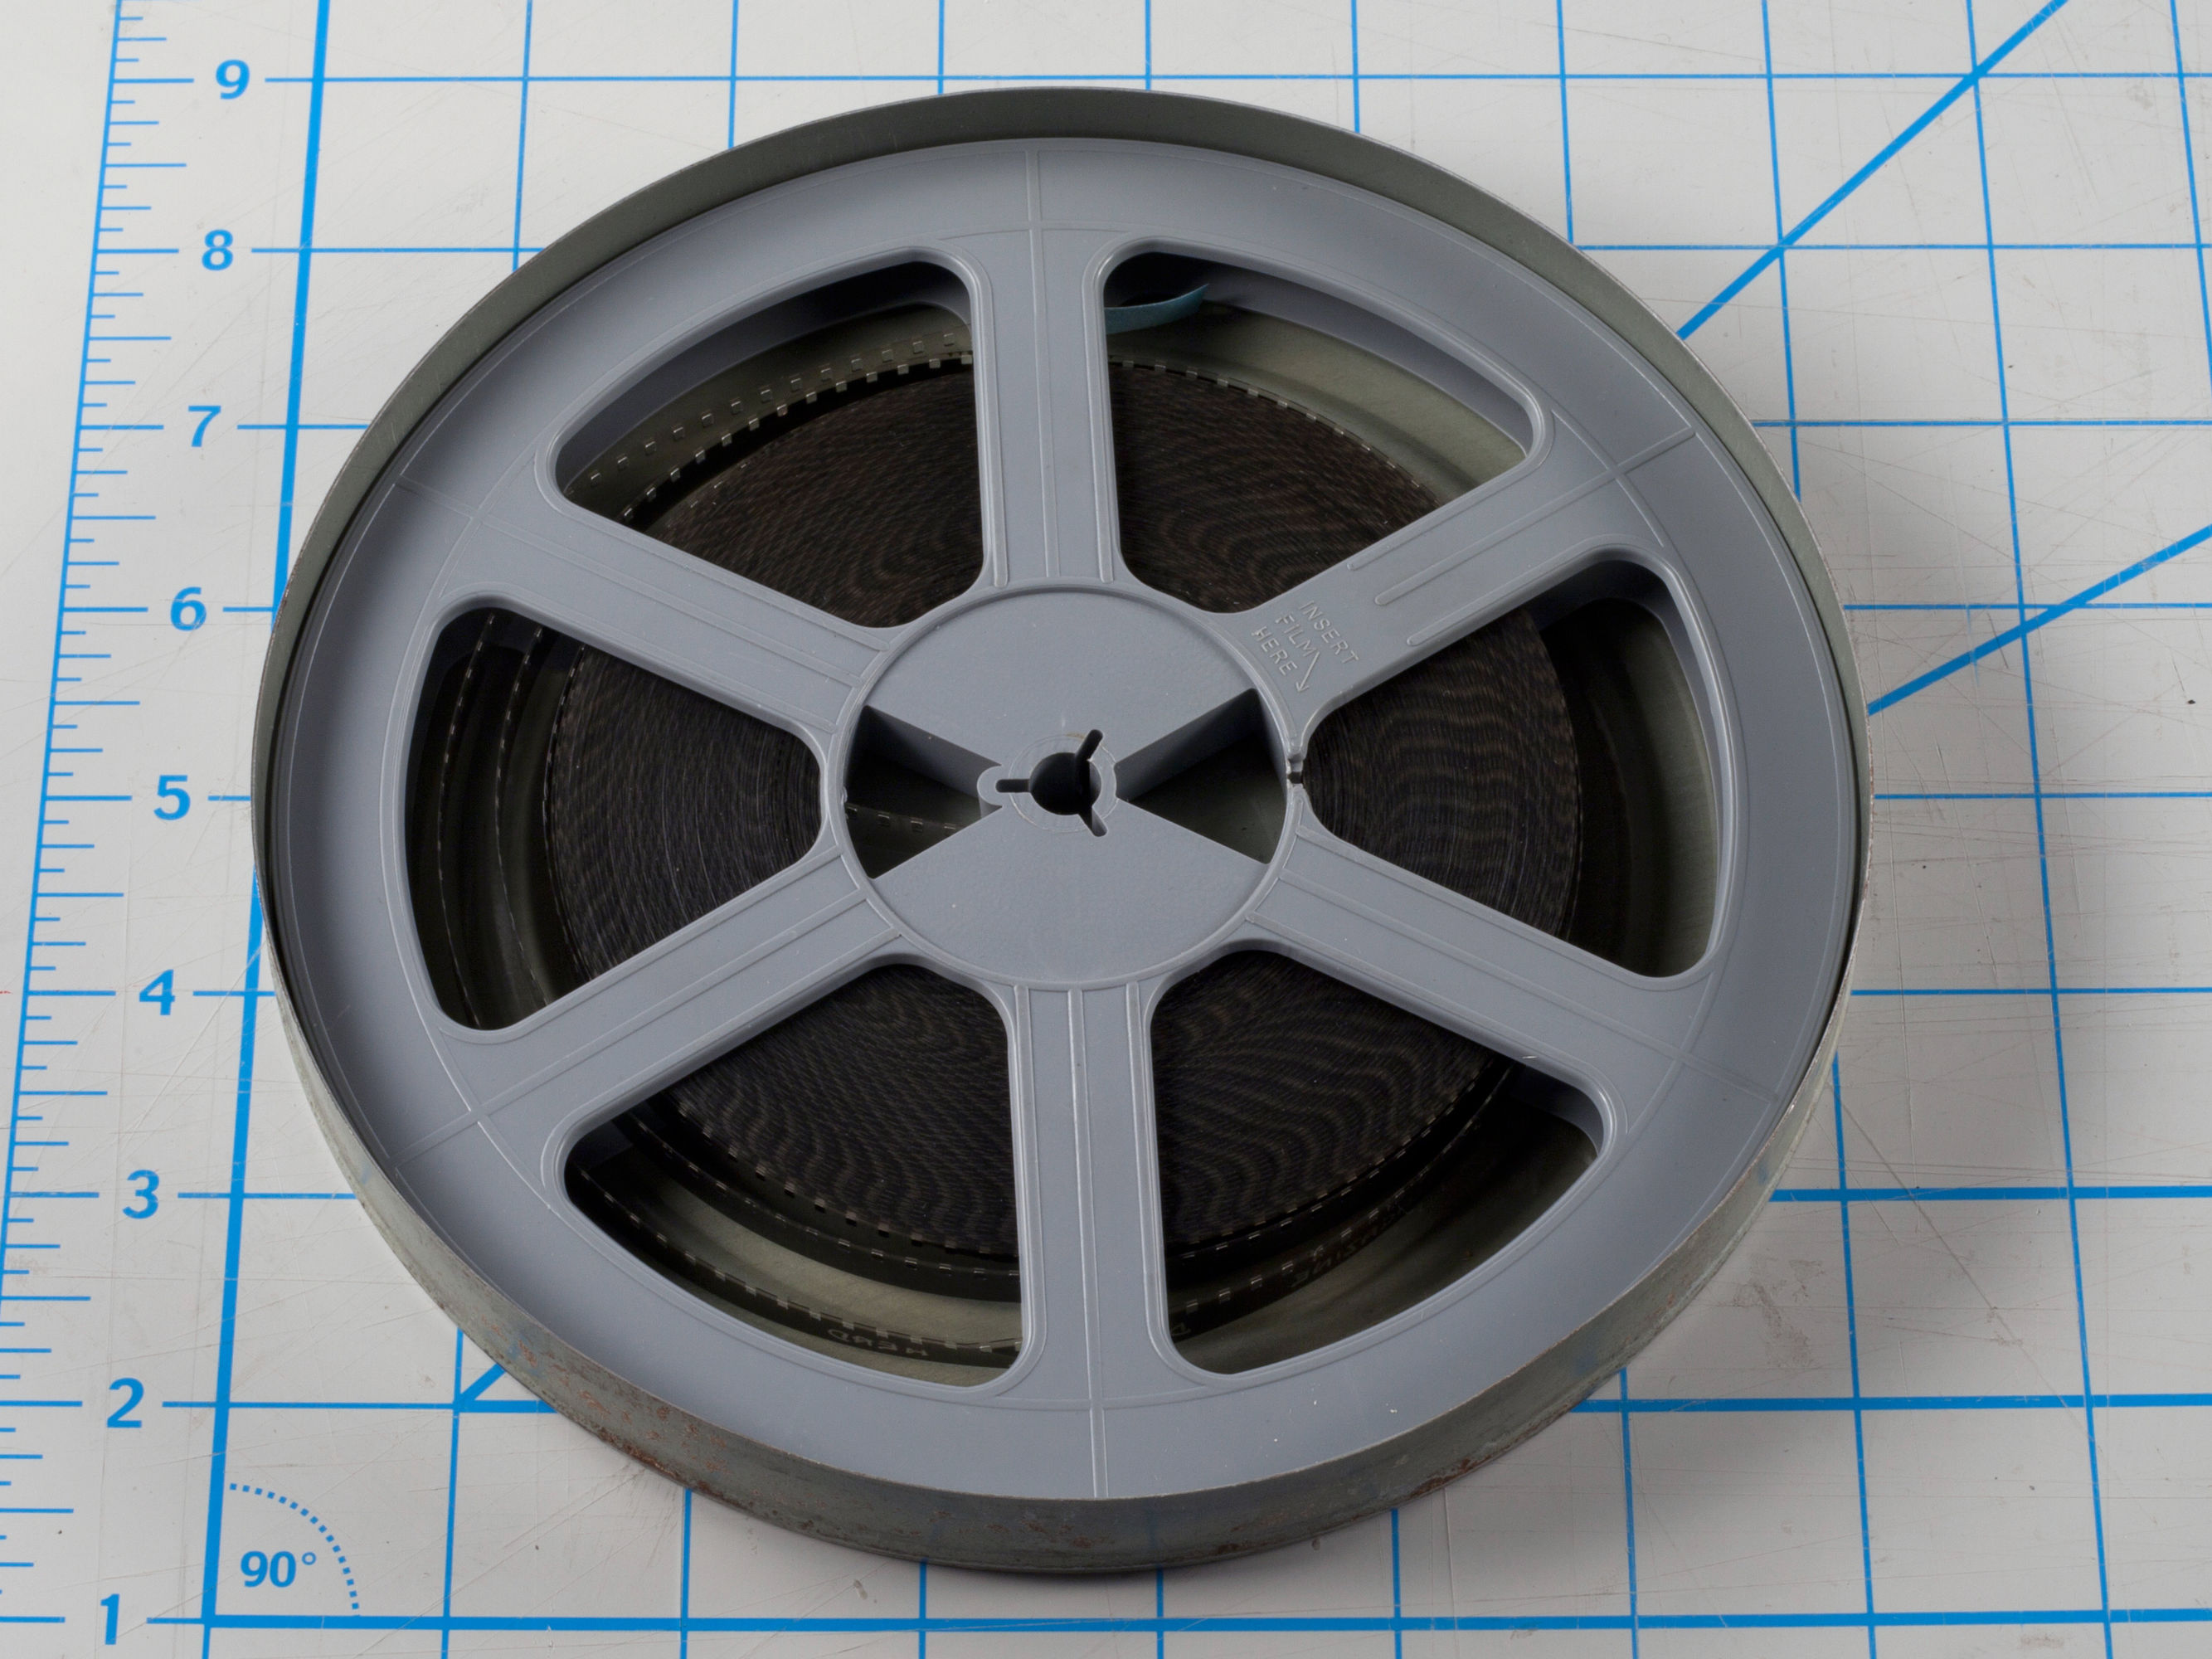 8mm Plastic Film Reels – Welcome to Spectra Film and Video